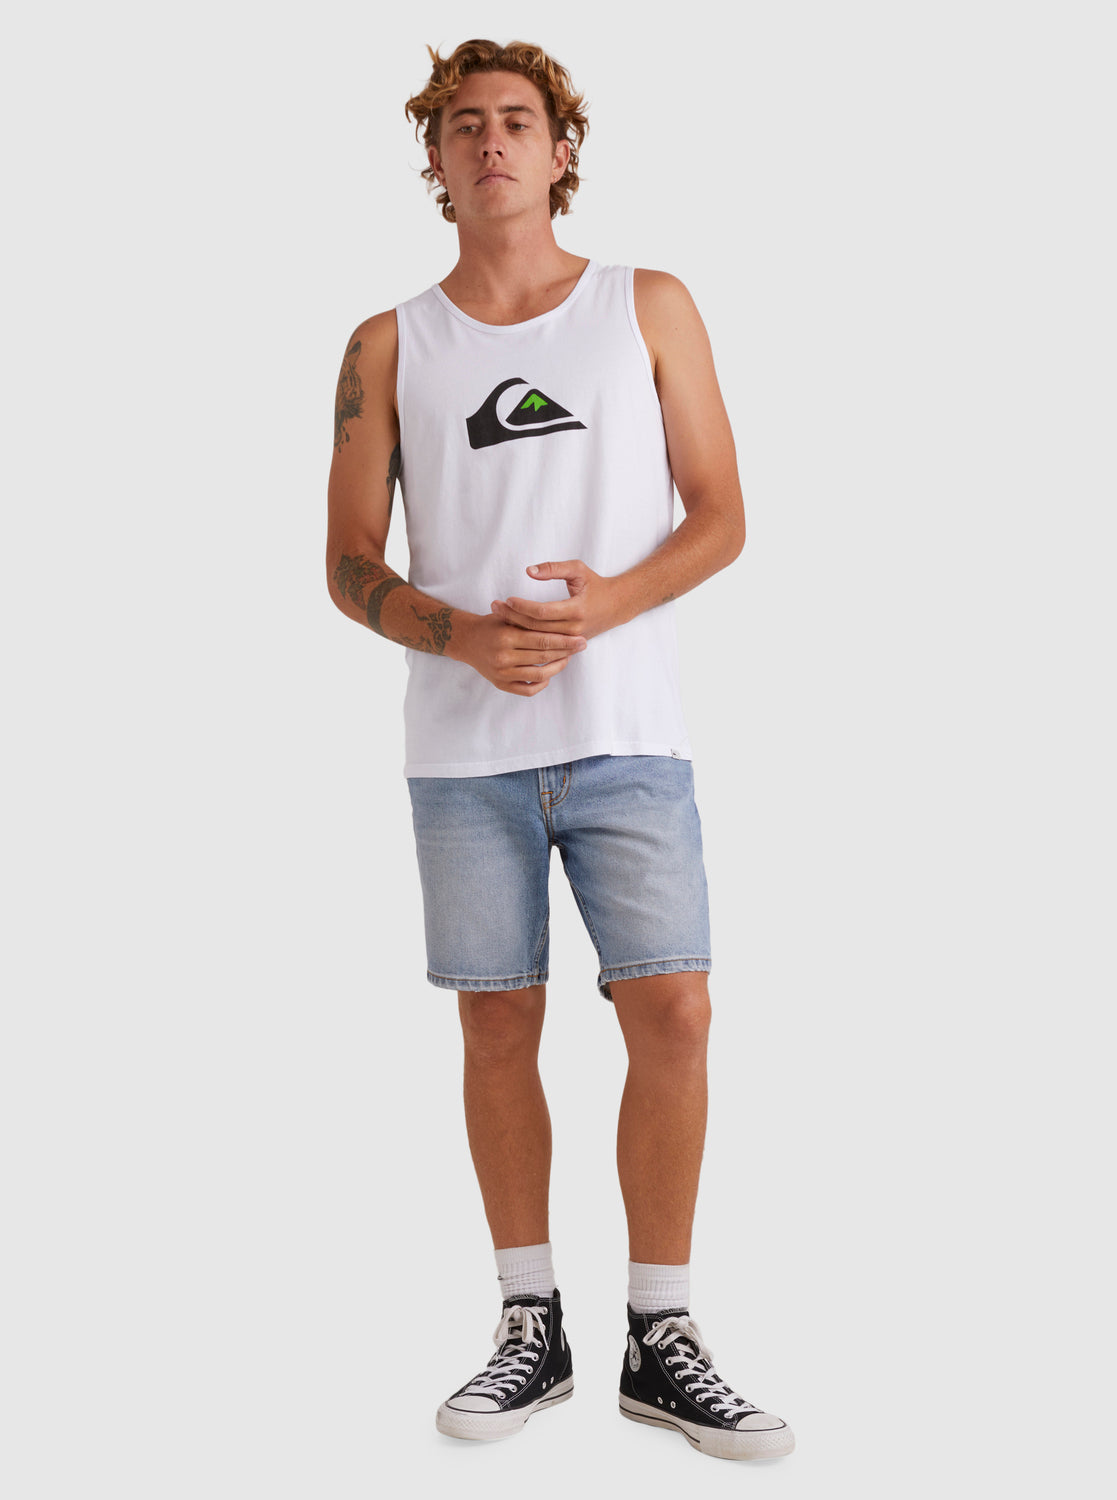 Quiksilver Comp Logo Tank in white on model from front